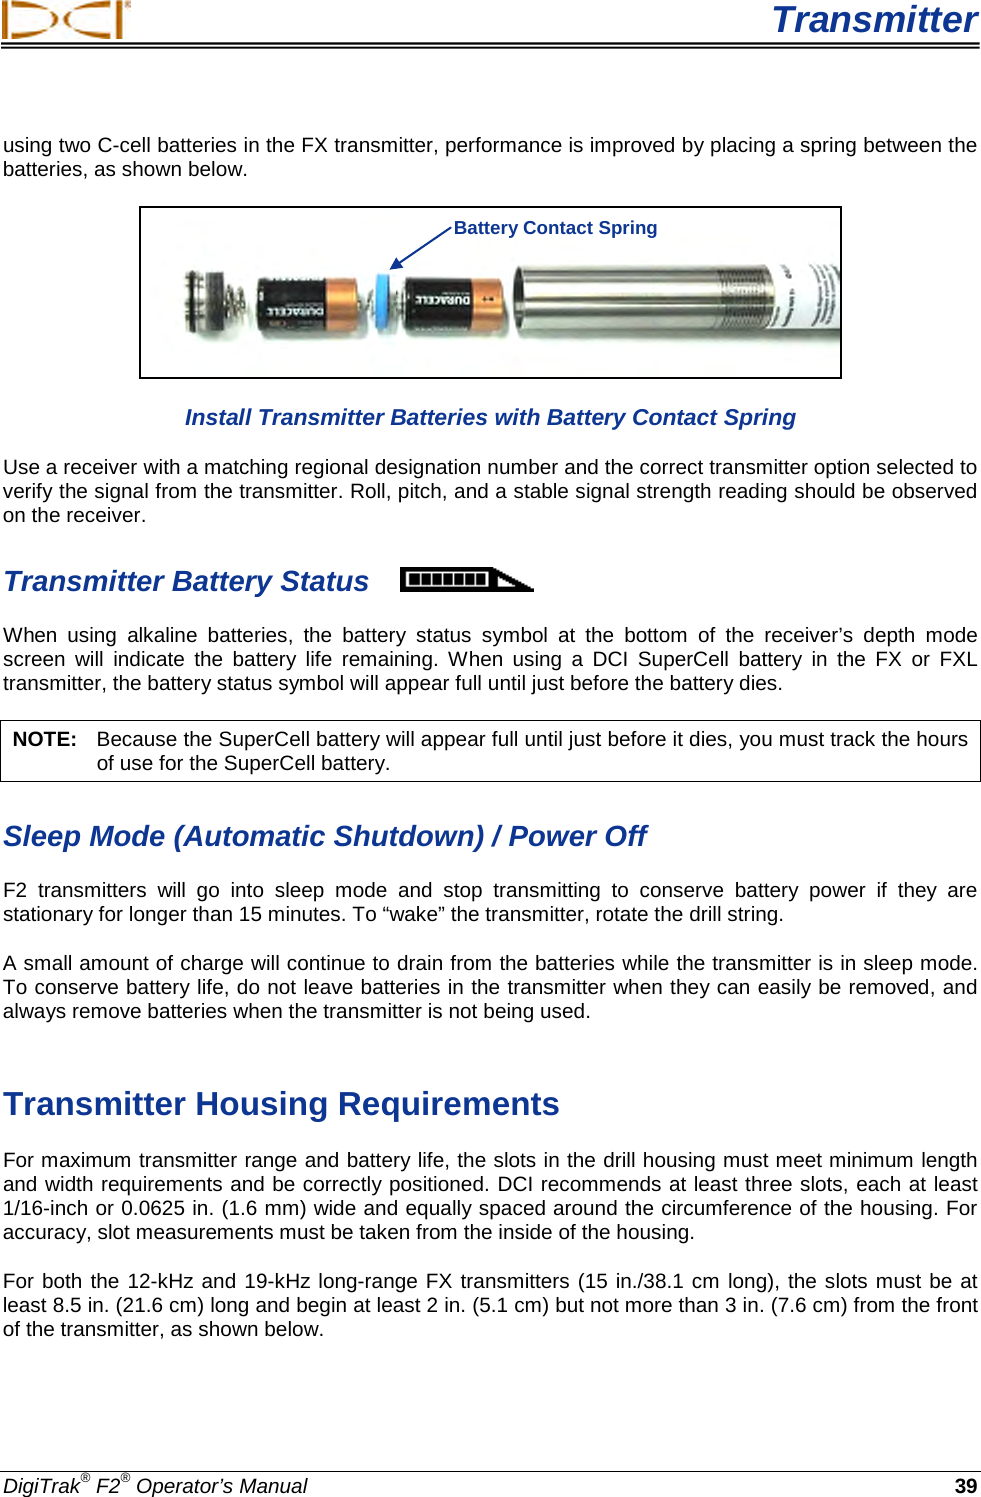  Transmitter DigiTrak® F2® Operator’s Manual 39 using two C-cell batteries in the FX transmitter, performance is improved by placing a spring between the batteries, as shown below.  Install Transmitter Batteries with Battery Contact Spring Use a receiver with a matching regional designation number and the correct transmitter option selected to verify the signal from the transmitter. Roll, pitch, and a stable signal strength reading should be observed on the receiver.  Transmitter Battery Status  When  using  alkaline batteries,  the battery  status  symbol  at the bottom of the receiver’s depth mode screen will indicate the battery life remaining.  When using a DCI SuperCell battery in the FX or FXL transmitter, the battery status symbol will appear full until just before the battery dies. NOTE:   Because the SuperCell battery will appear full until just before it dies, you must track the hours of use for the SuperCell battery. Sleep Mode (Automatic Shutdown) / Power Off F2 transmitters will go into sleep mode and stop transmitting to conserve battery power if they are stationary for longer than 15 minutes. To “wake” the transmitter, rotate the drill string.  A small amount of charge will continue to drain from the batteries while the transmitter is in sleep mode. To conserve battery life, do not leave batteries in the transmitter when they can easily be removed, and always remove batteries when the transmitter is not being used.   Transmitter Housing Requirements For maximum transmitter range and battery life, the slots in the drill housing must meet minimum length and width requirements and be correctly positioned. DCI recommends at least three slots, each at least 1/16-inch or 0.0625 in. (1.6 mm) wide and equally spaced around the circumference of the housing. For accuracy, slot measurements must be taken from the inside of the housing.  For both the 12-kHz and 19-kHz long-range FX transmitters (15 in./38.1 cm long), the slots must be at least 8.5 in. (21.6 cm) long and begin at least 2 in. (5.1 cm) but not more than 3 in. (7.6 cm) from the front of the transmitter, as shown below. Battery Contact Spring 